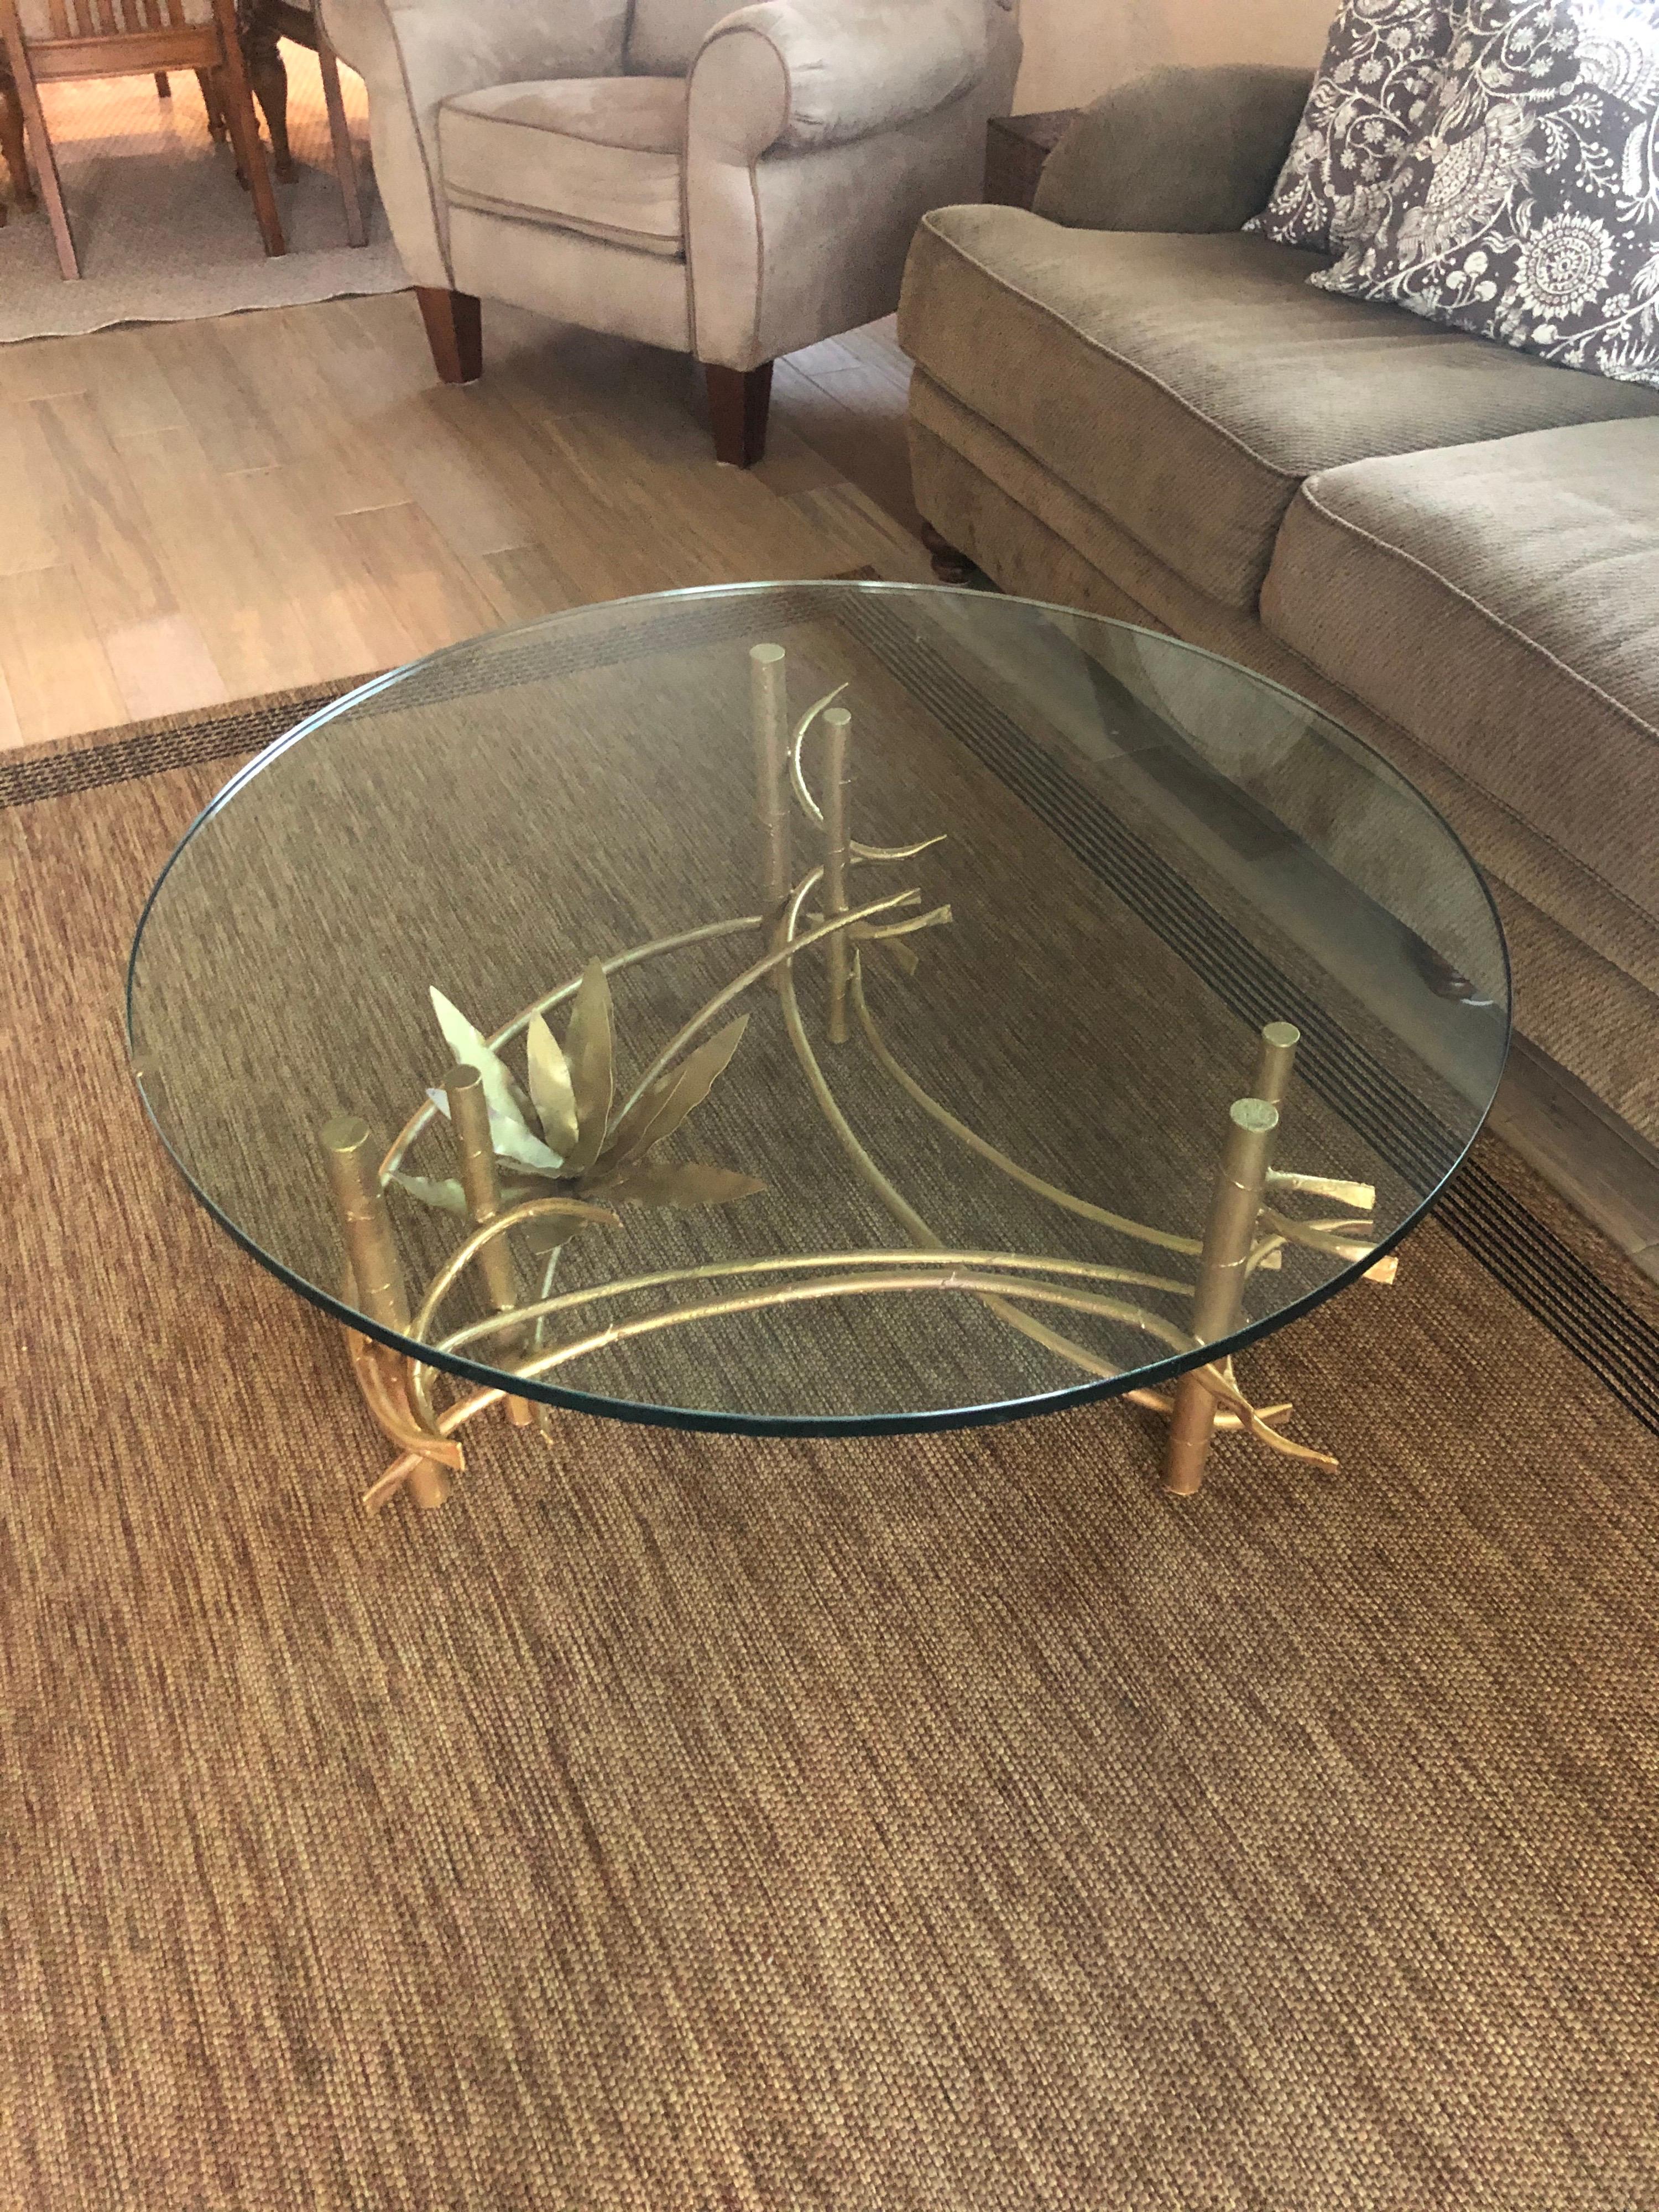 Silas Seandel lotus coffee table. Handcrafted by the artist. Decorative Asian feel to this floral sculptural base. Thick round glass top to table. The glass is 3/4